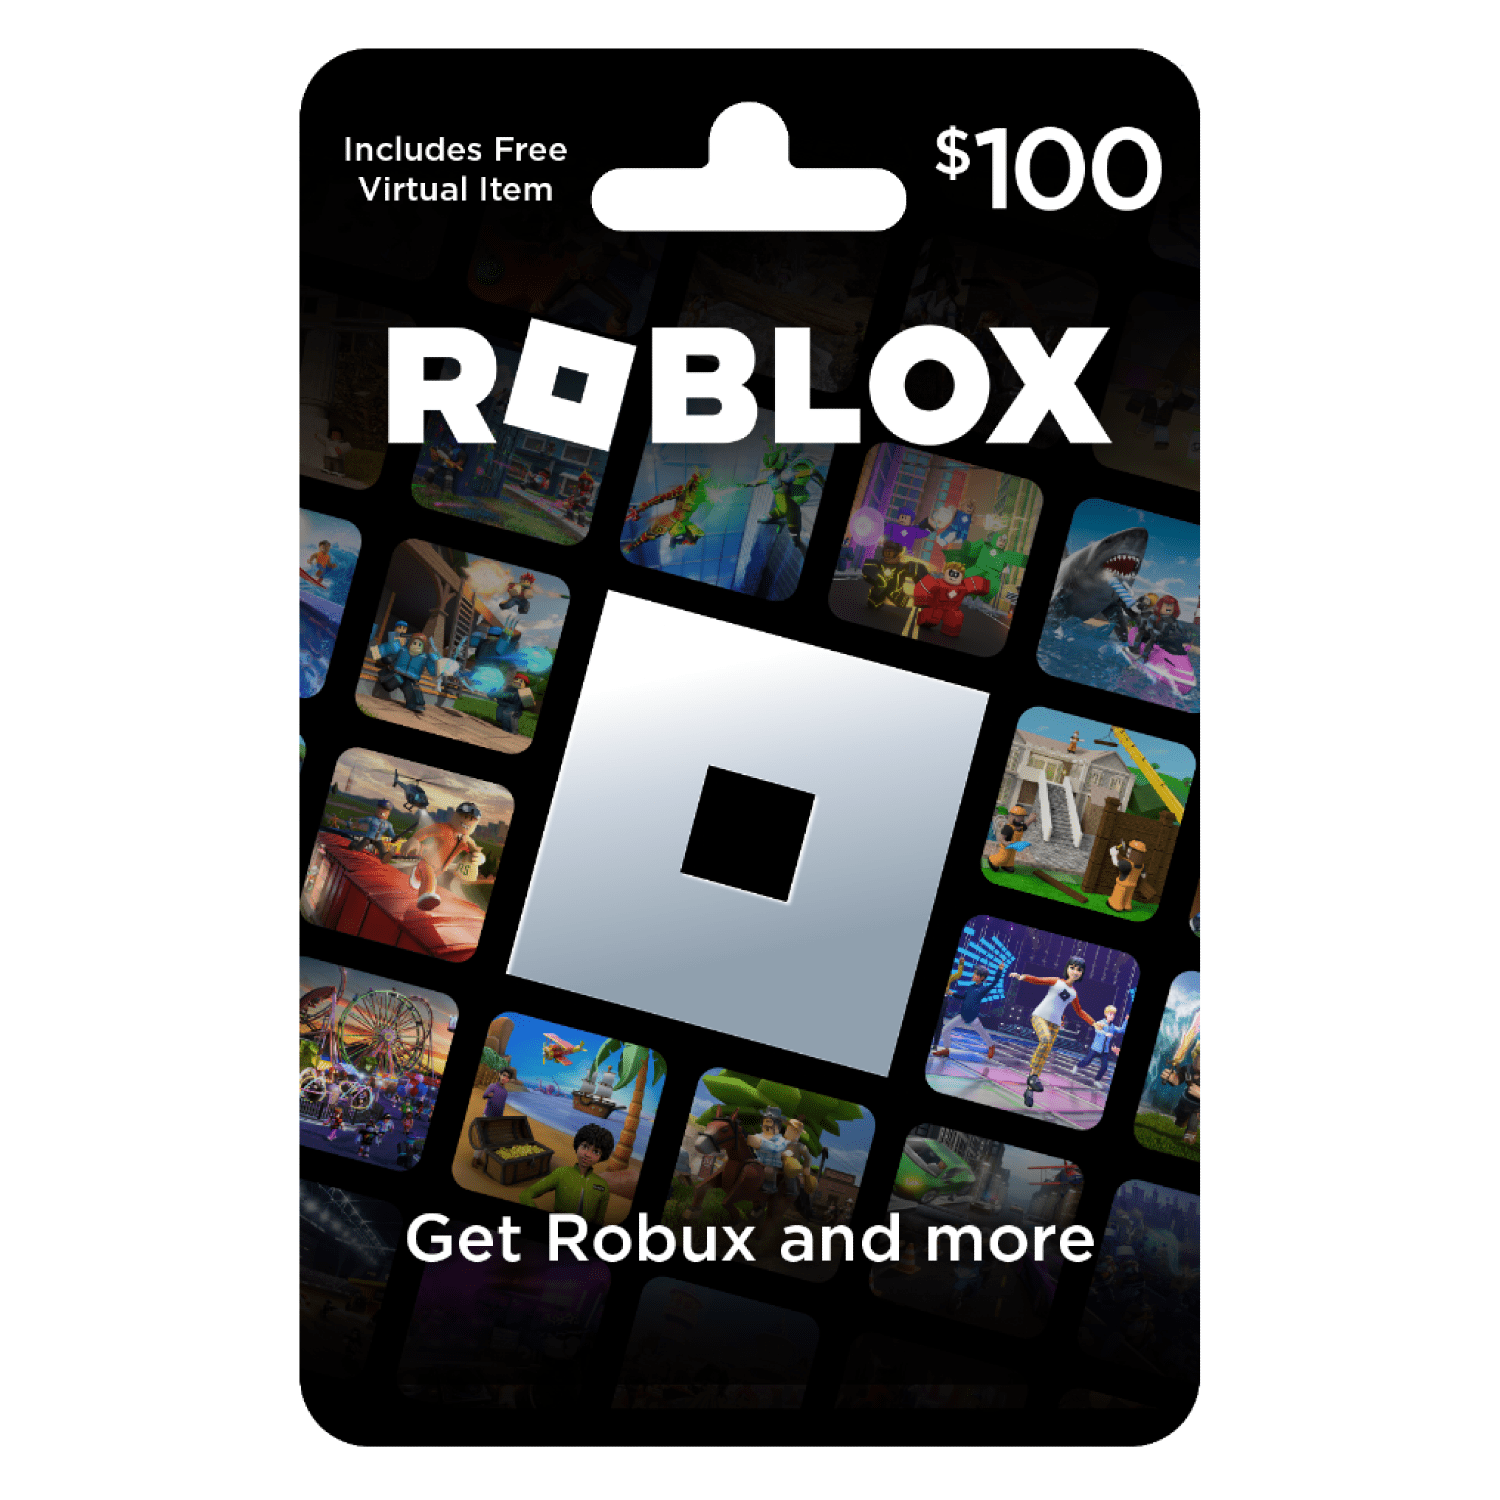 TOP 5 Way To Earn ROBUX On ROBLOX With BLOX.LAND! (WORKING 100